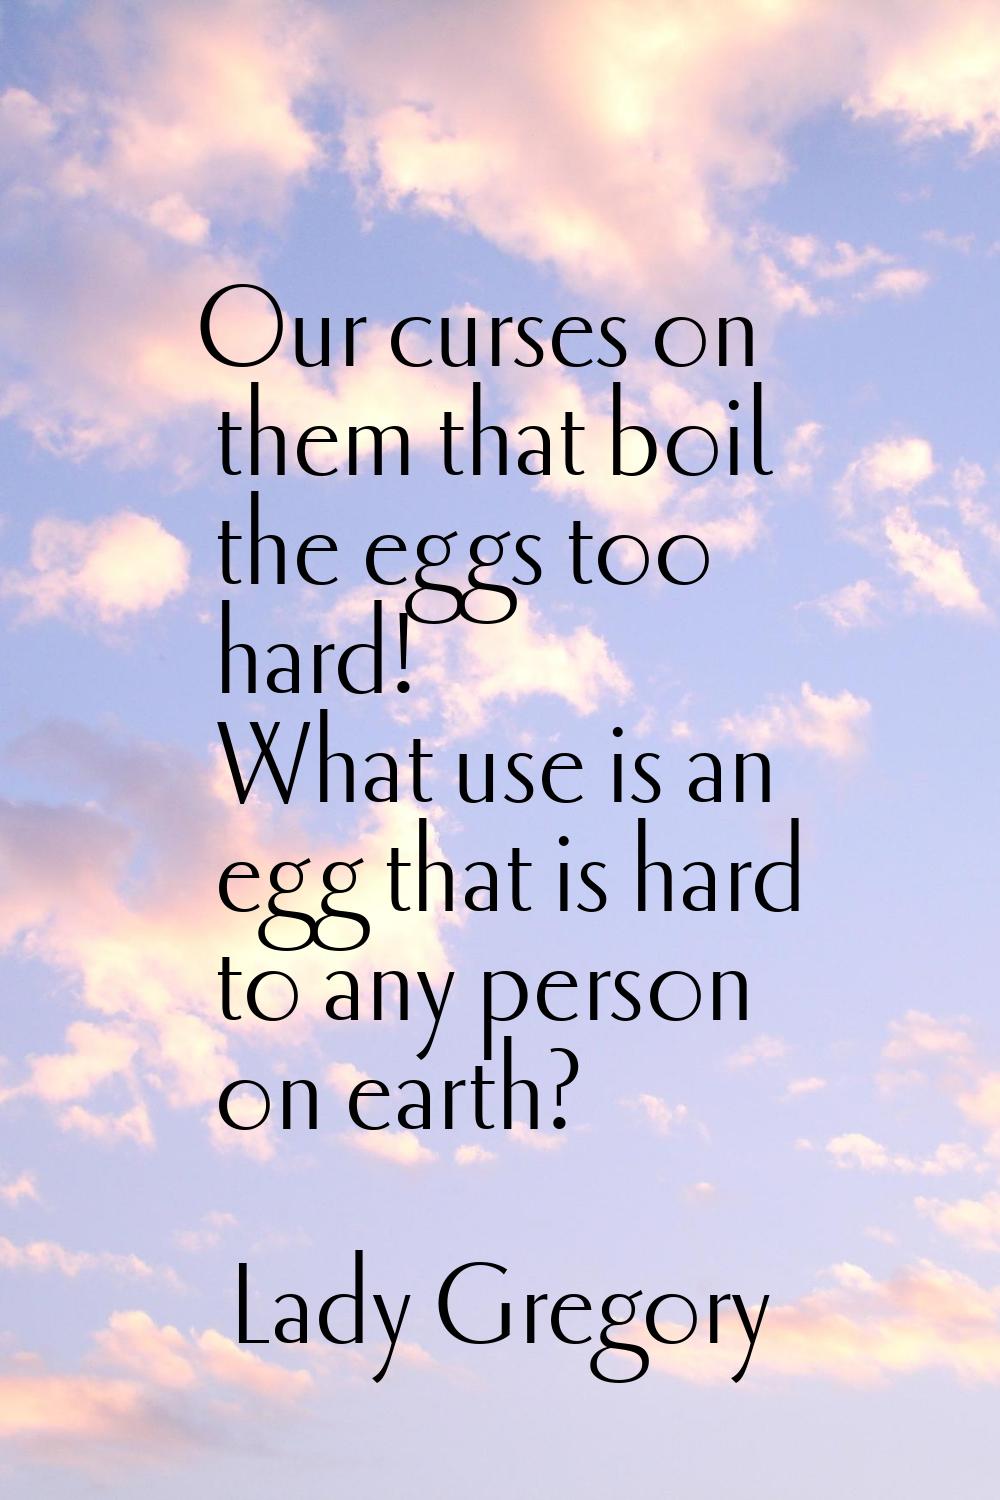 Our curses on them that boil the eggs too hard! What use is an egg that is hard to any person on ea